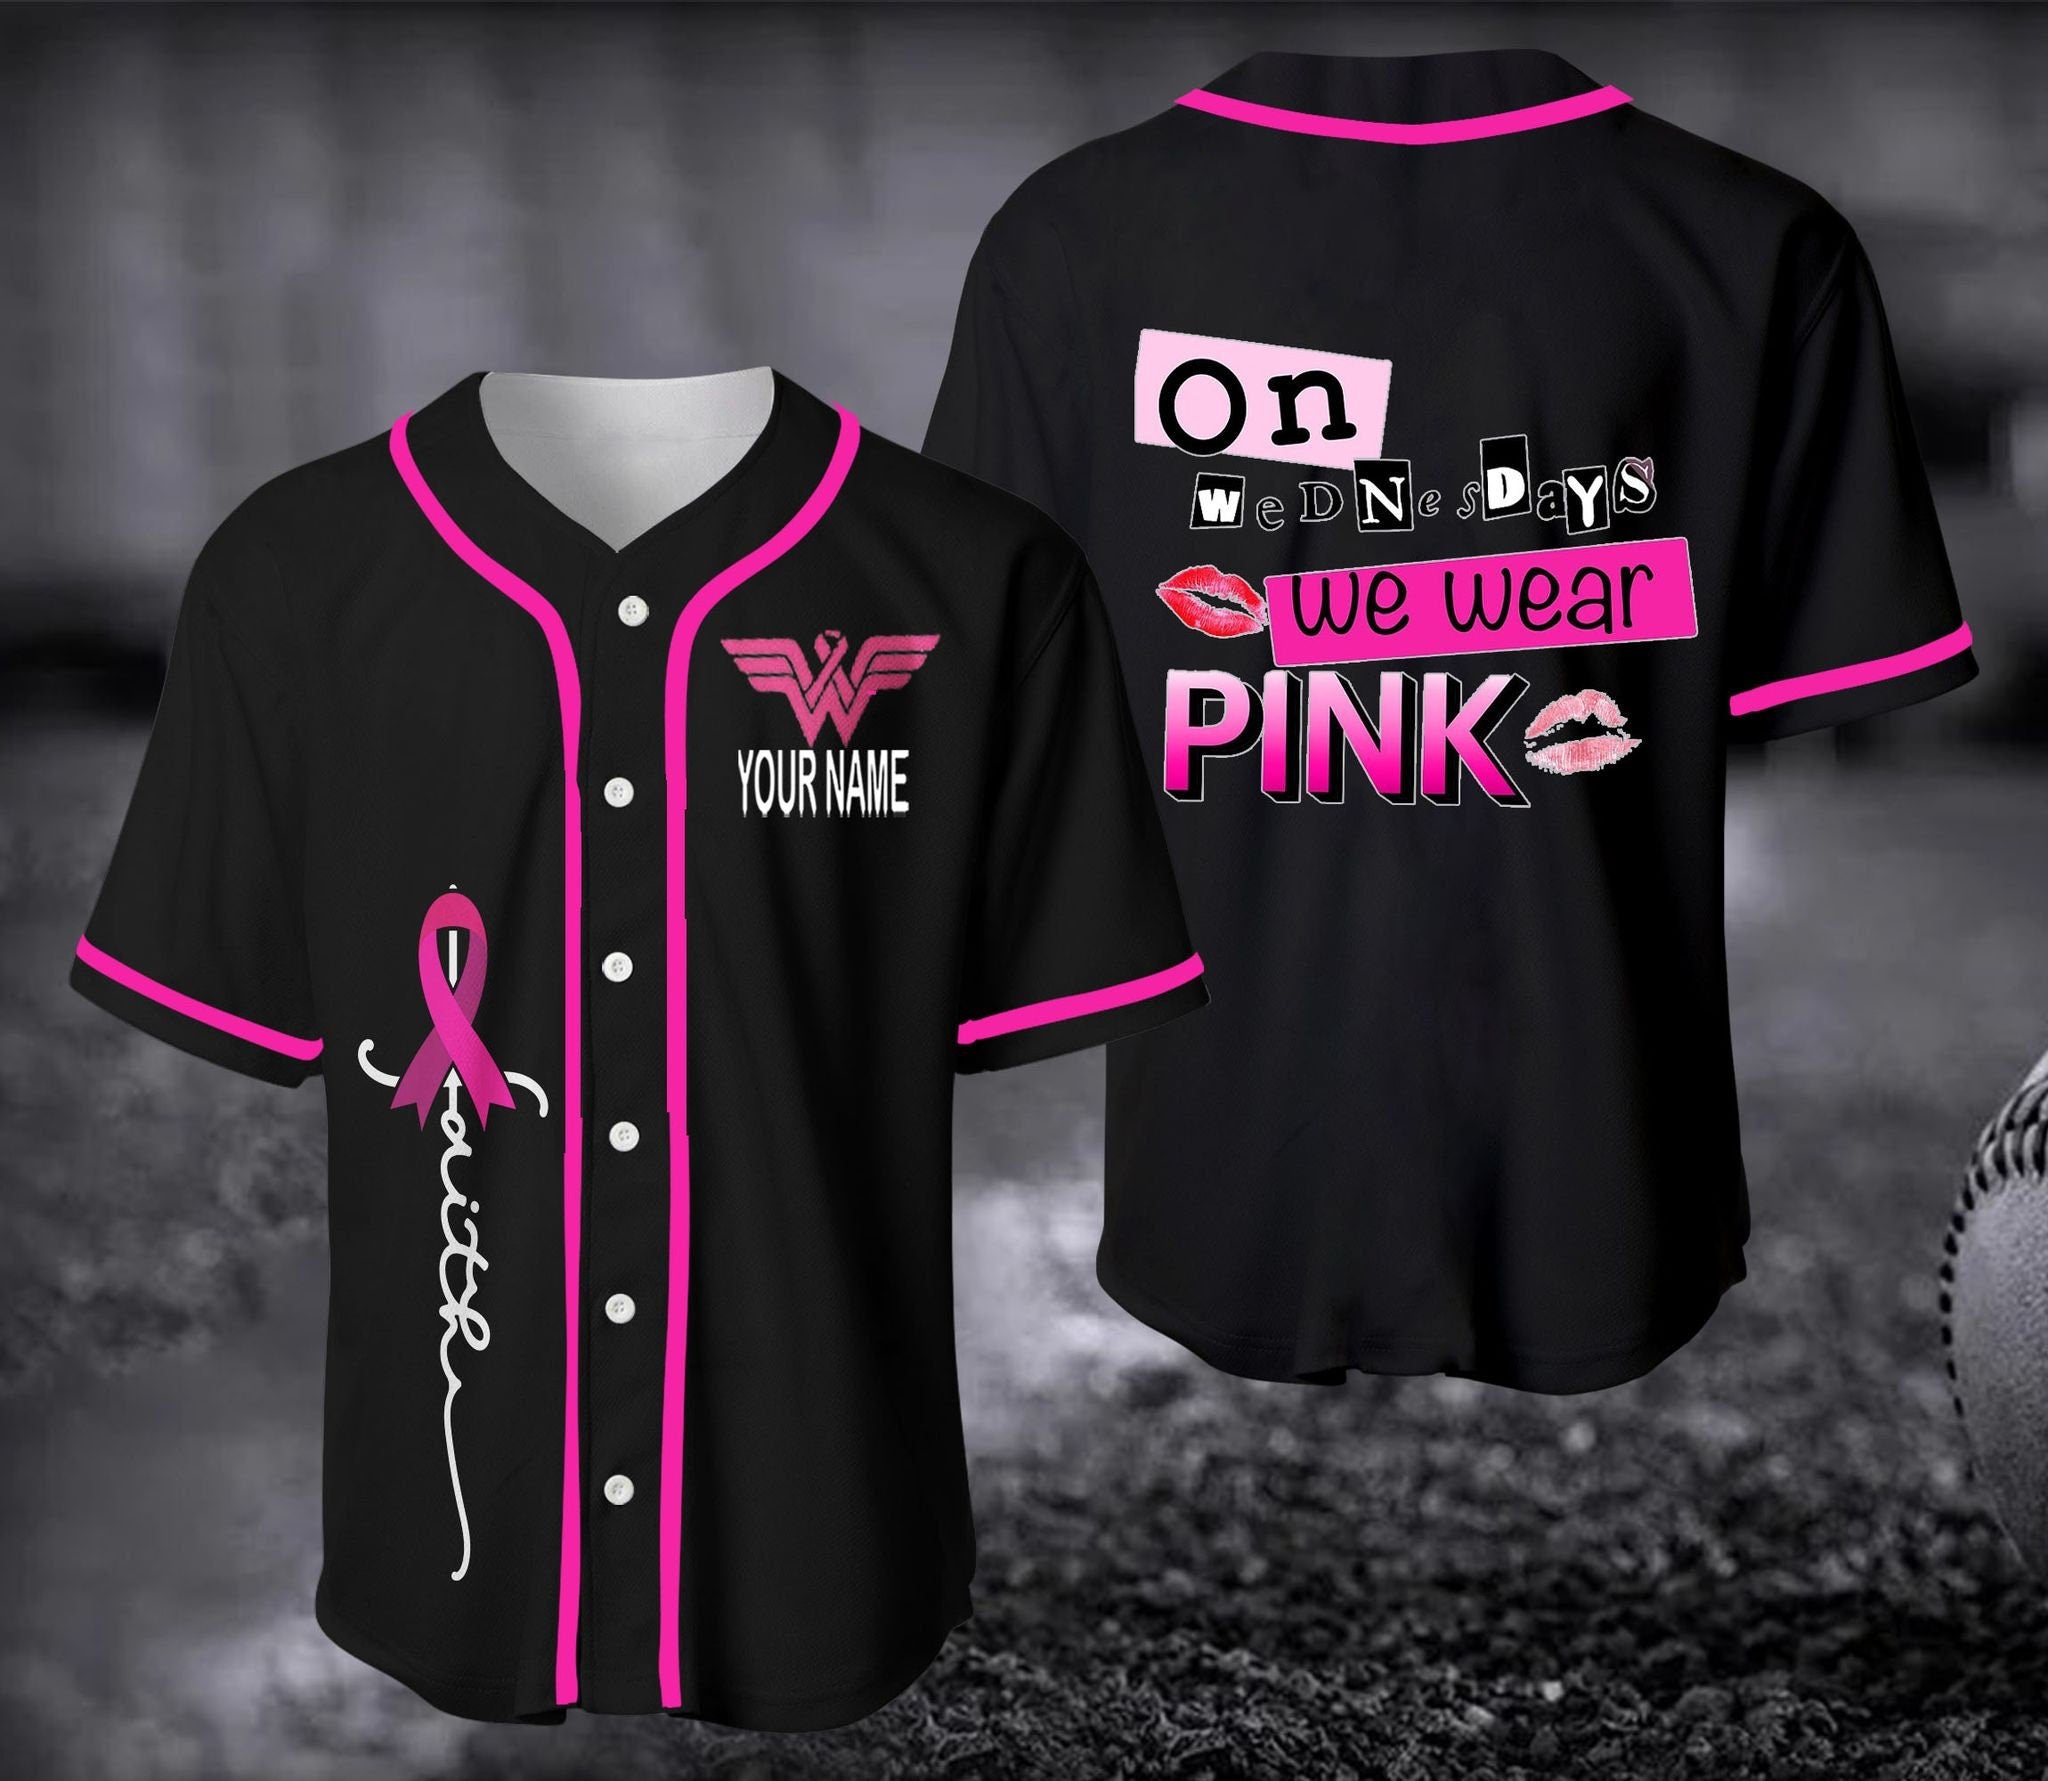 On Wednesday We Wear Pink Jersey Shirt/ Multilcolor Breast Cancer Jersey Shirt